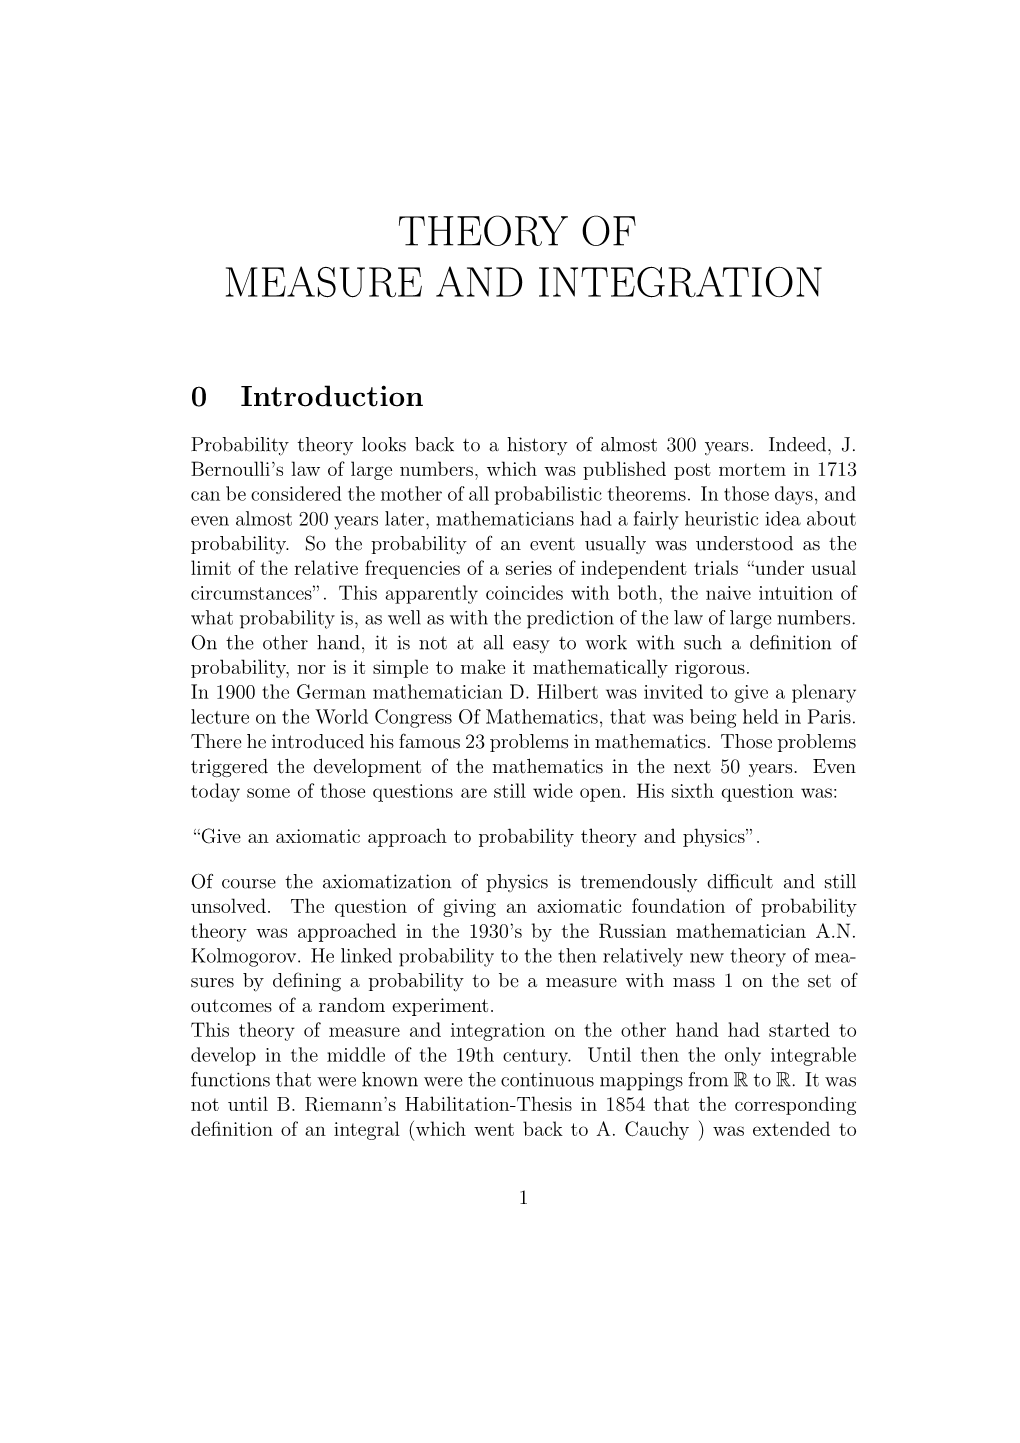 Theory of Measure and Integration